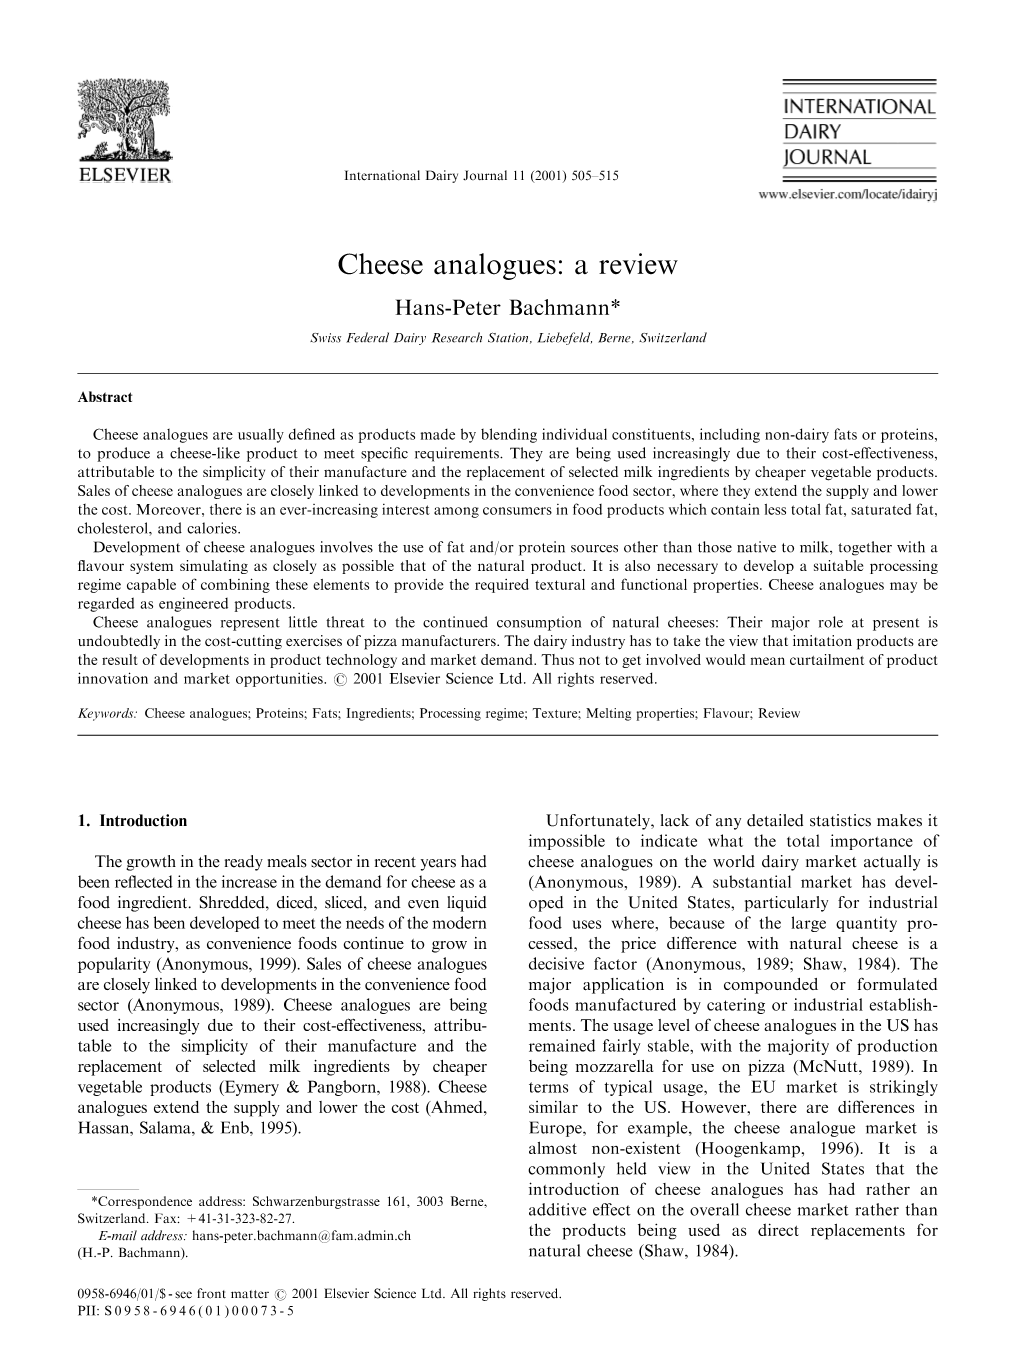 Cheese Analogues: a Review Hans-Peter Bachmann* Swiss Federal Dairy Research Station, Liebefeld, Berne, Switzerland